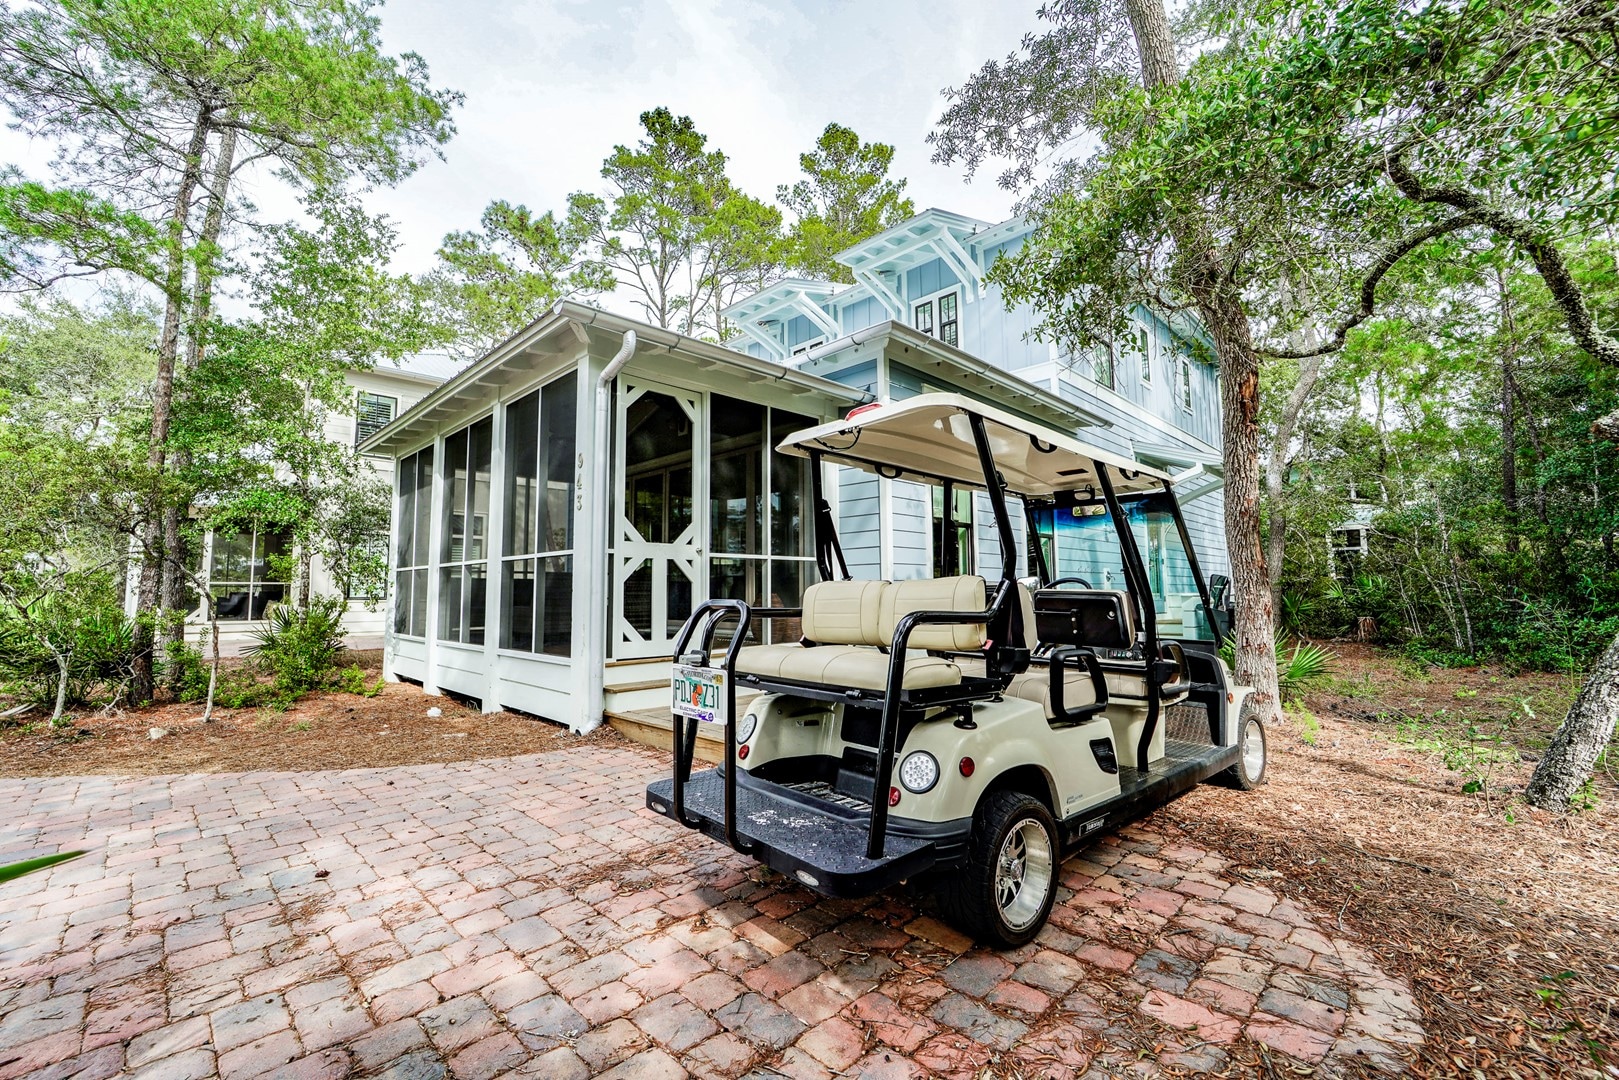 Golf Cart Included!